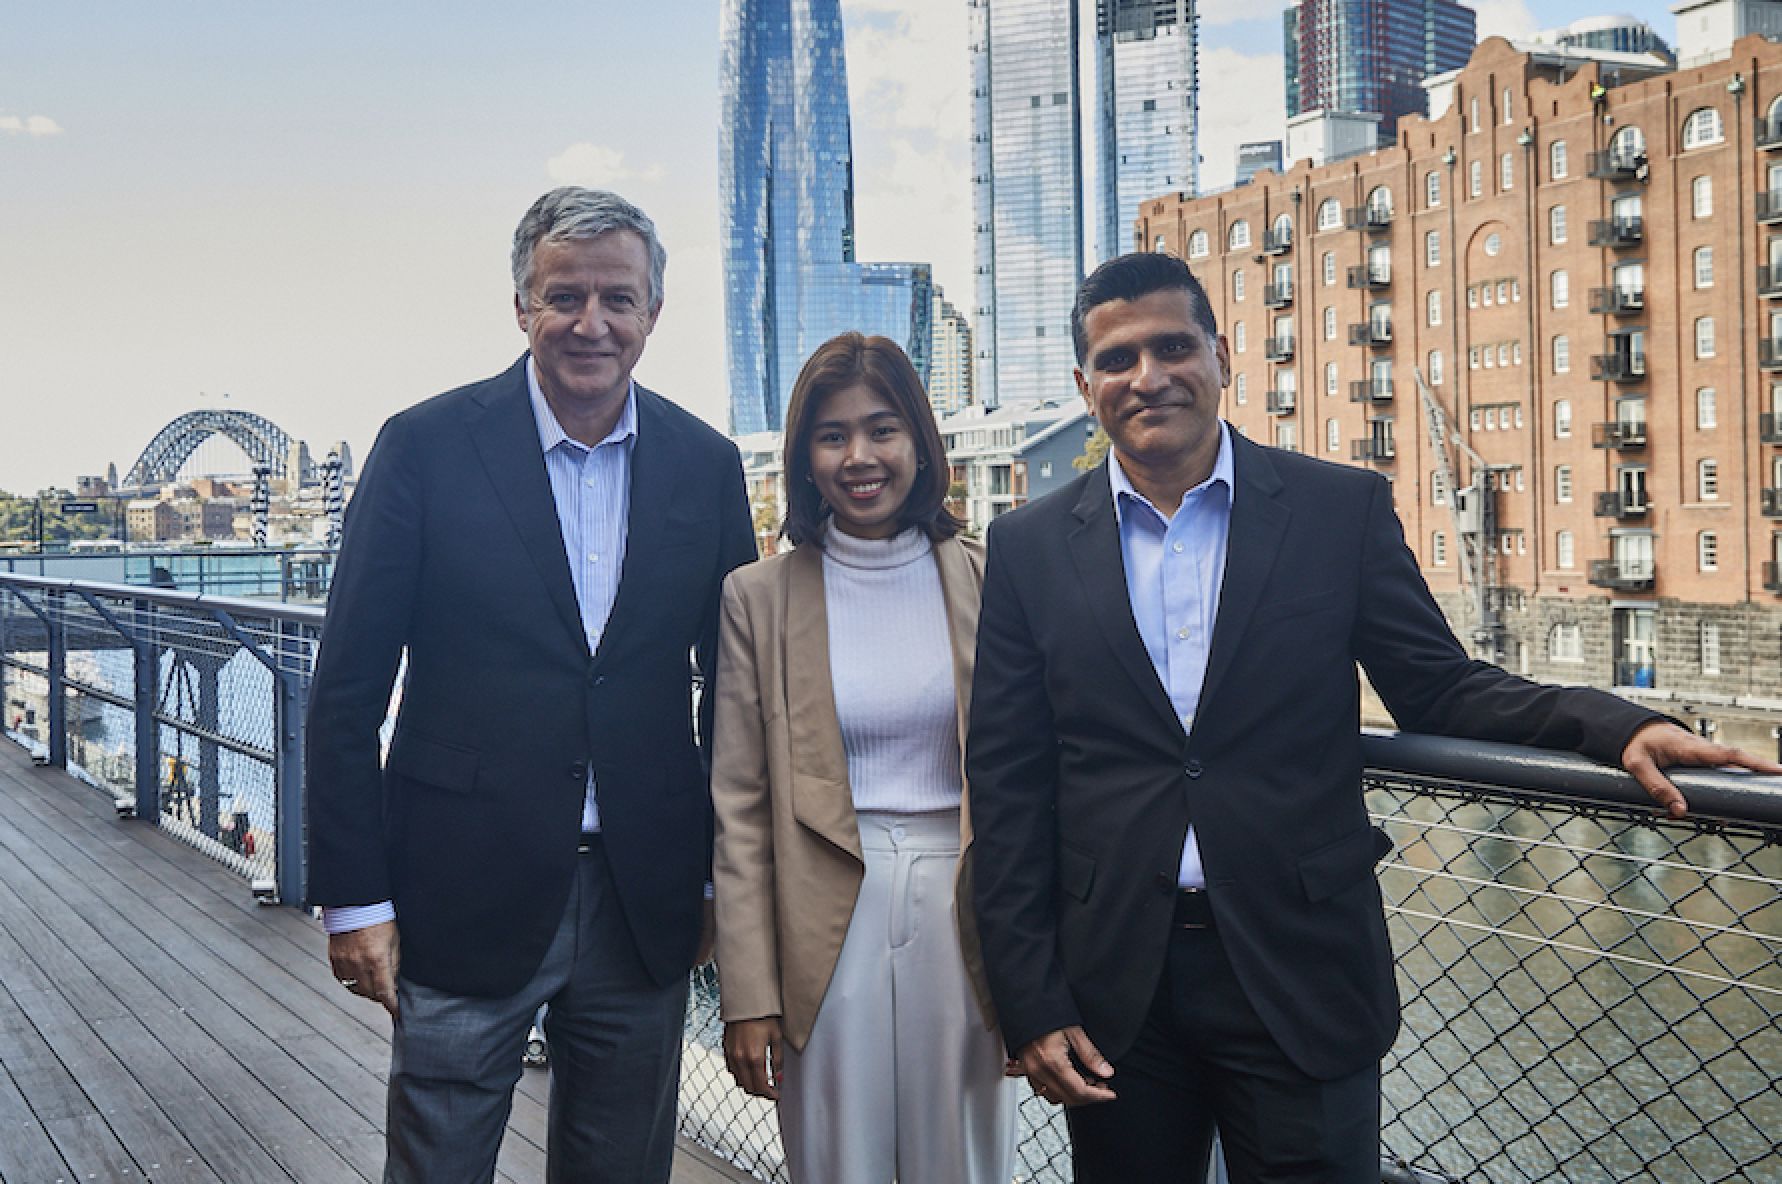 John Murphy, Coca-Cola Company President and CFO, Phearong Shedung, Executive Director of Banteay Srei and former Kiva borrower, and Vishal Ghotge, CEO of Kiva, in Sydney